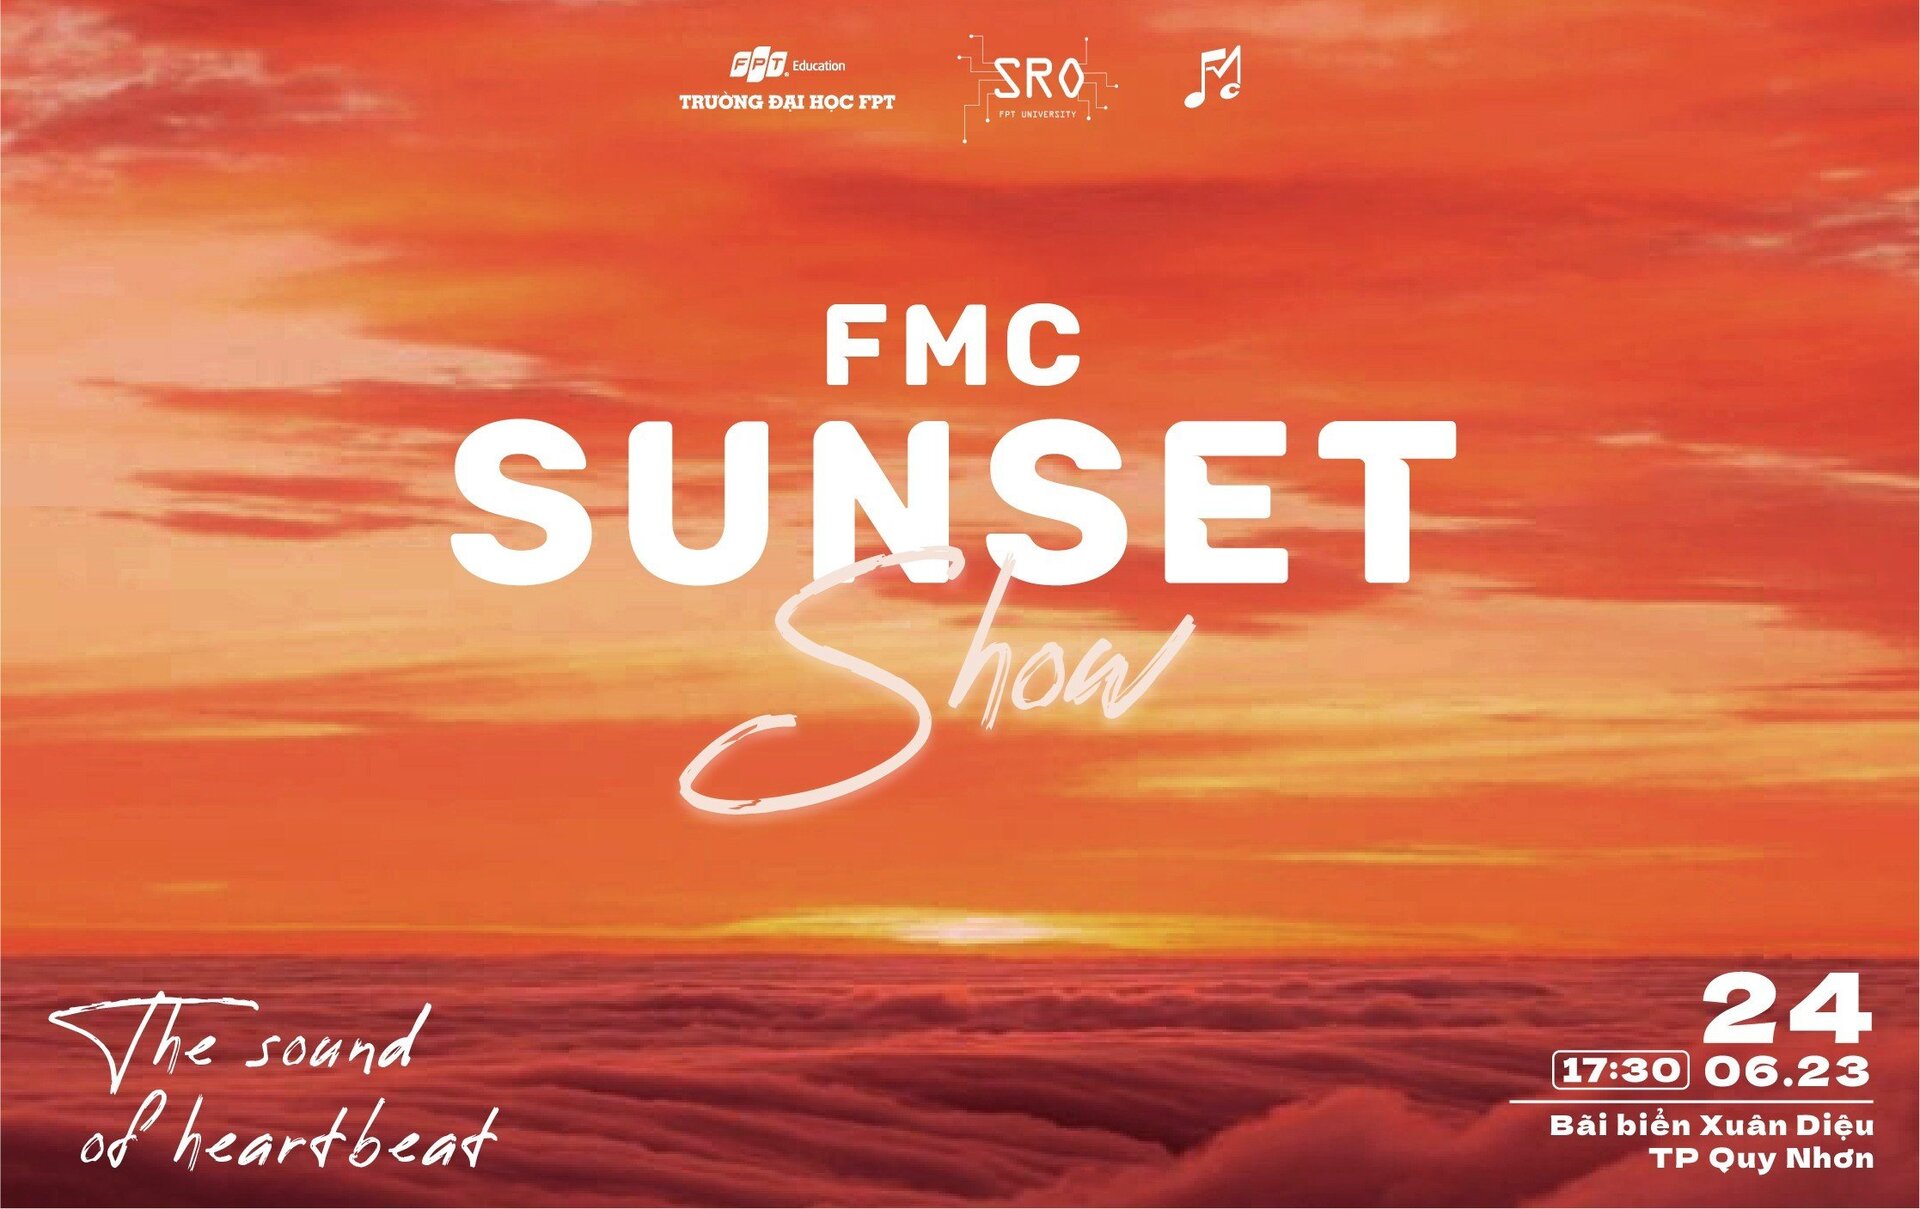 FMC SUNSET SHOW - “THE SOUND OF HEARTBEAT”